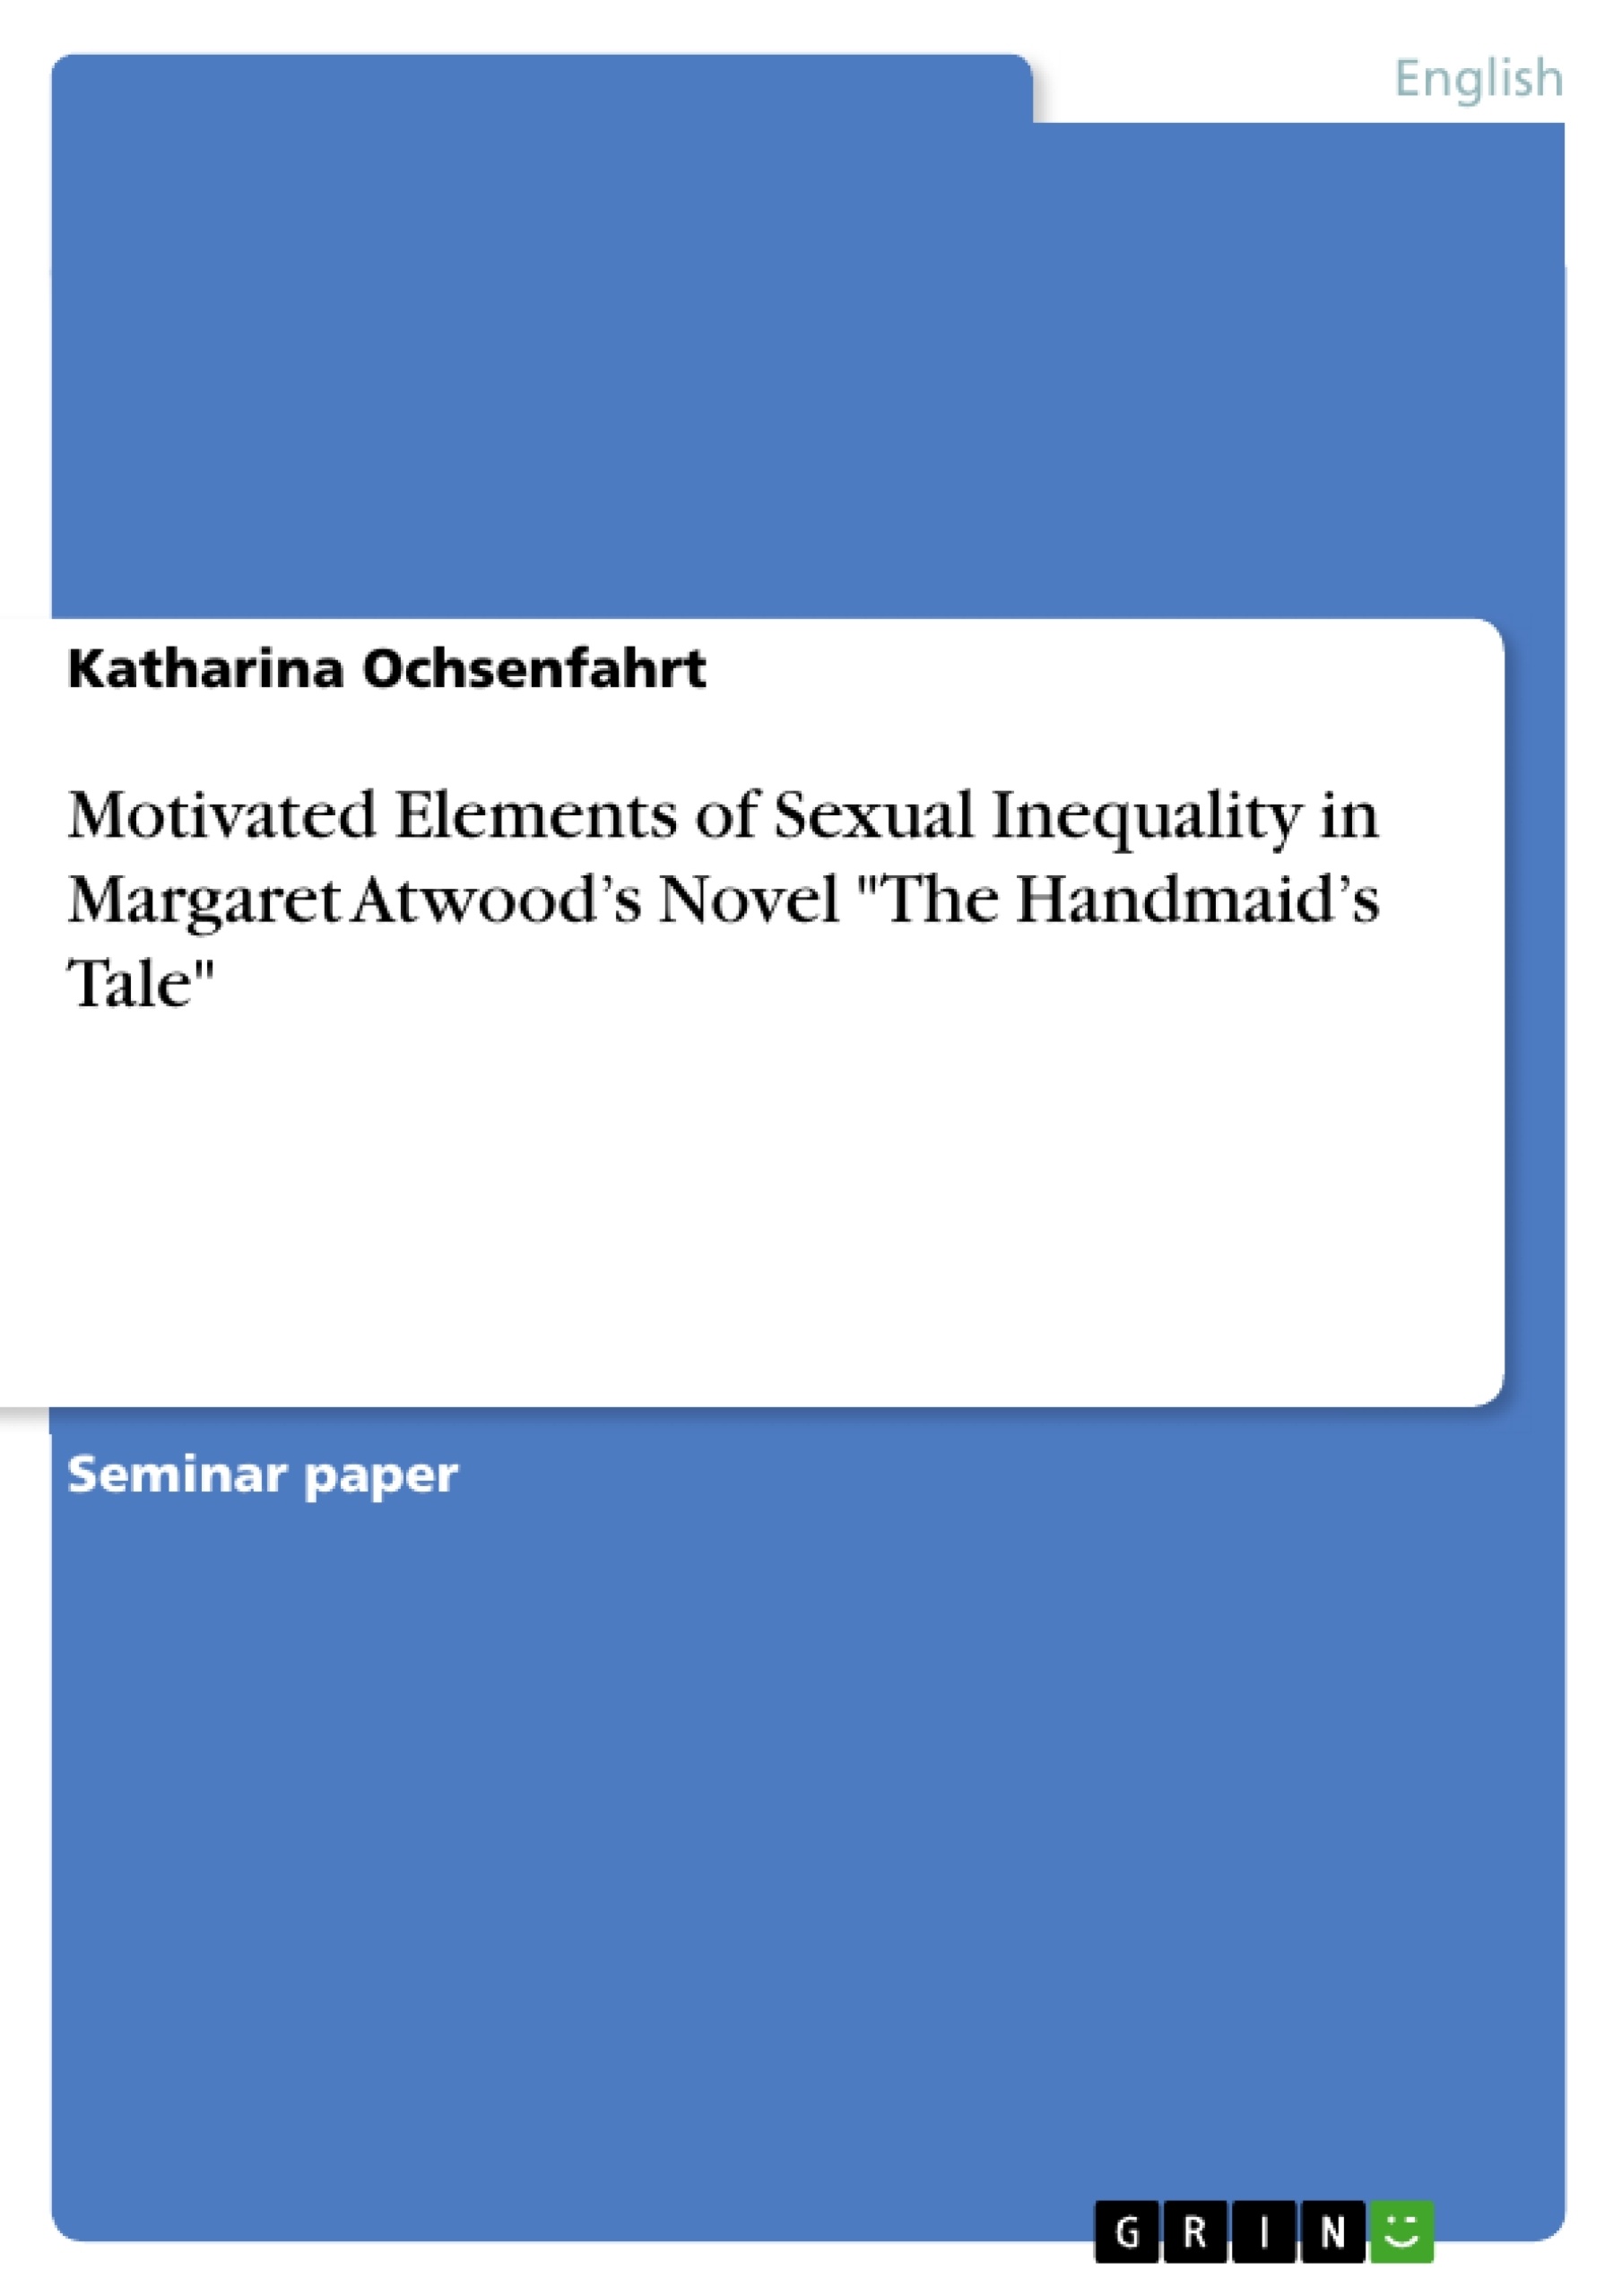 Title: Motivated Elements of Sexual Inequality in Margaret Atwood’s Novel "The Handmaid’s Tale"